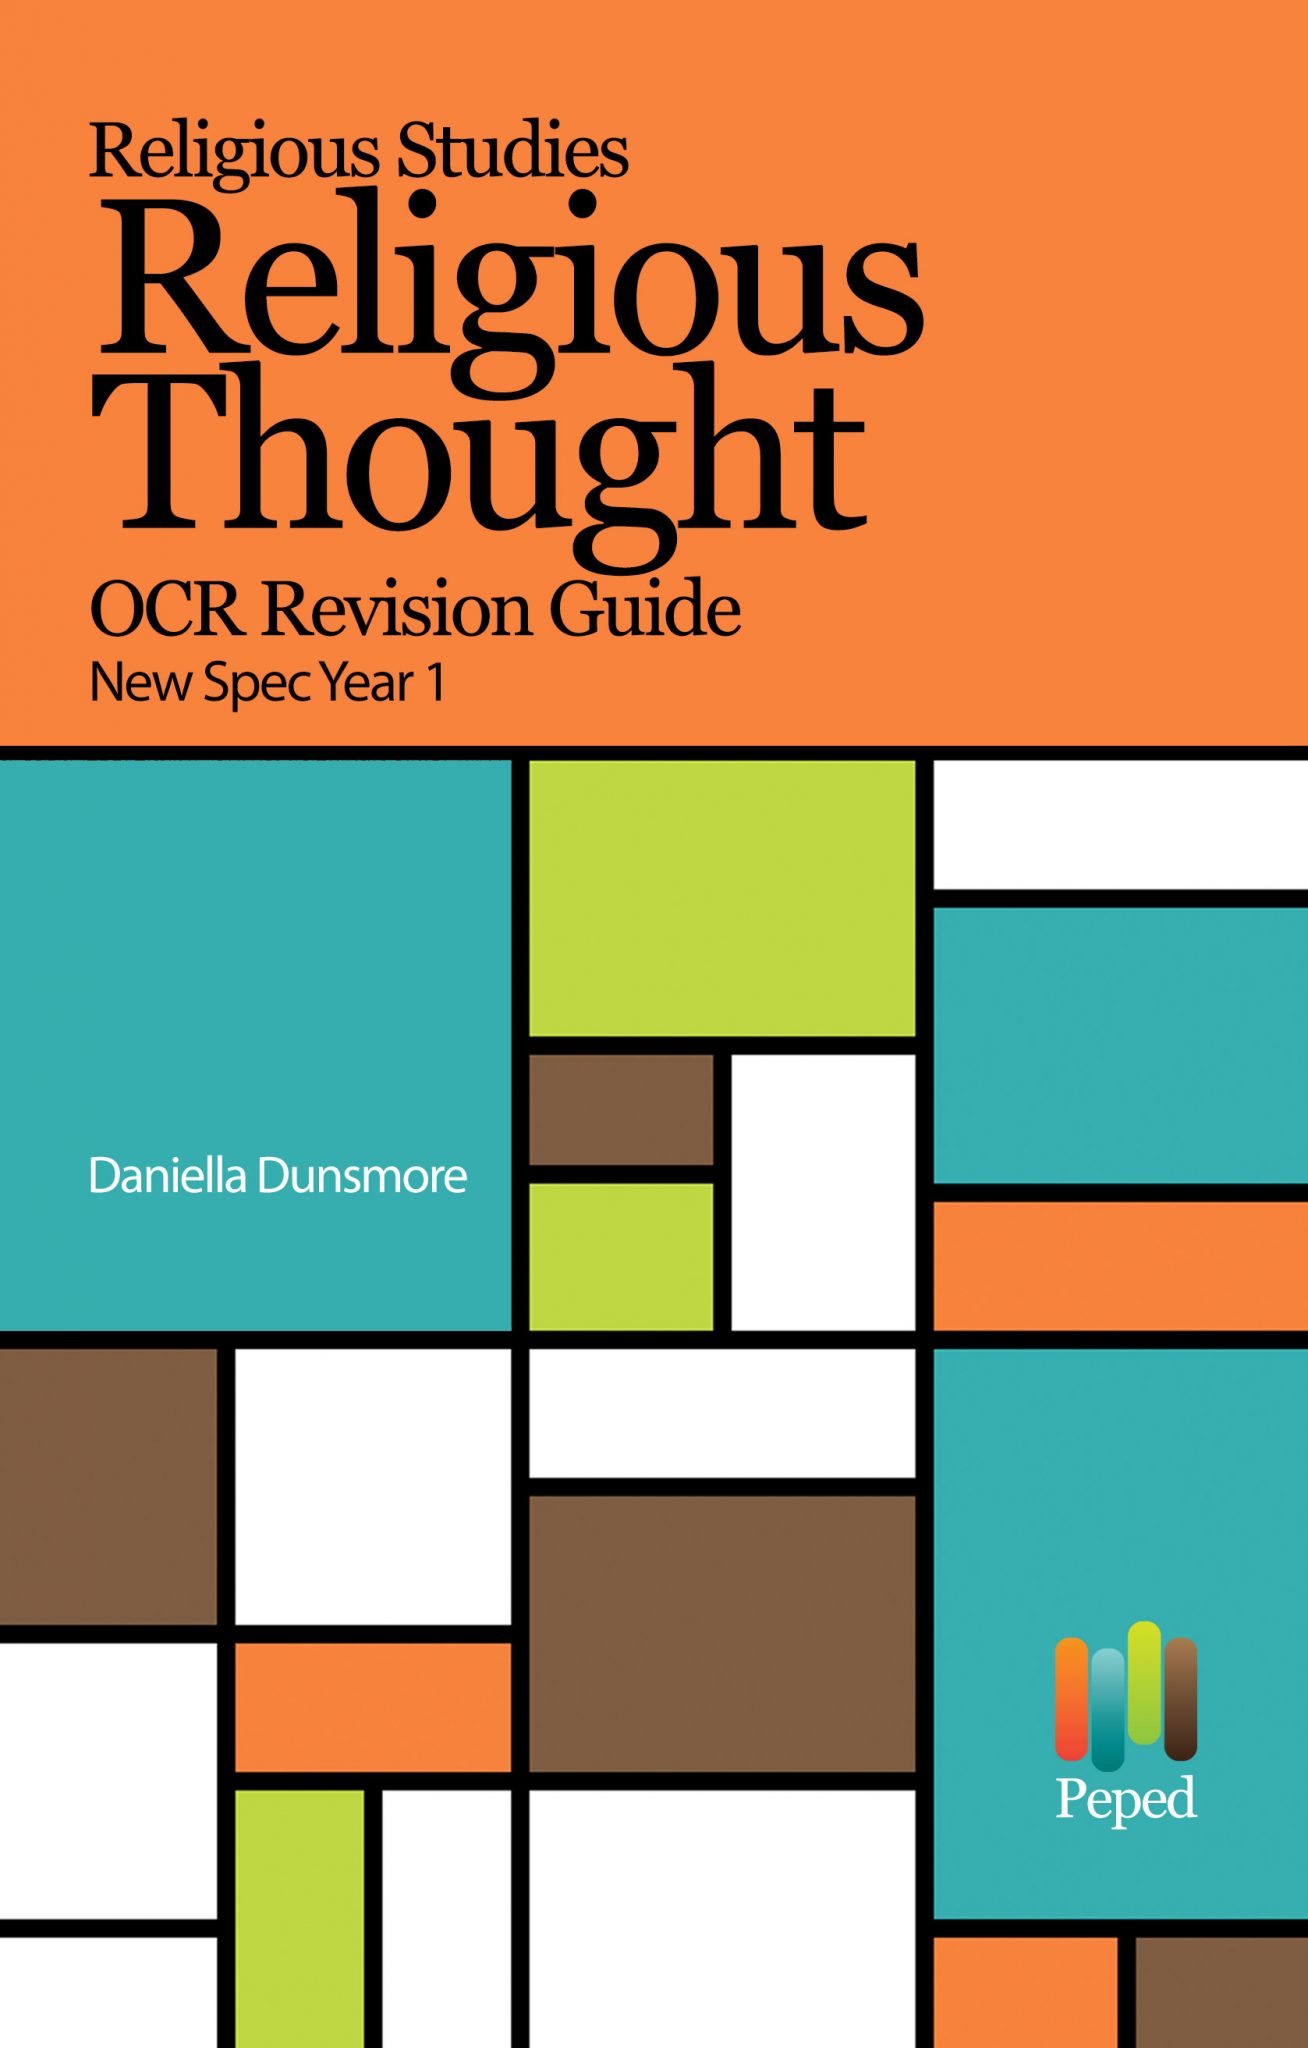 Religious Studies: Religious Thought OCR Revision Guide New Spec Year 1